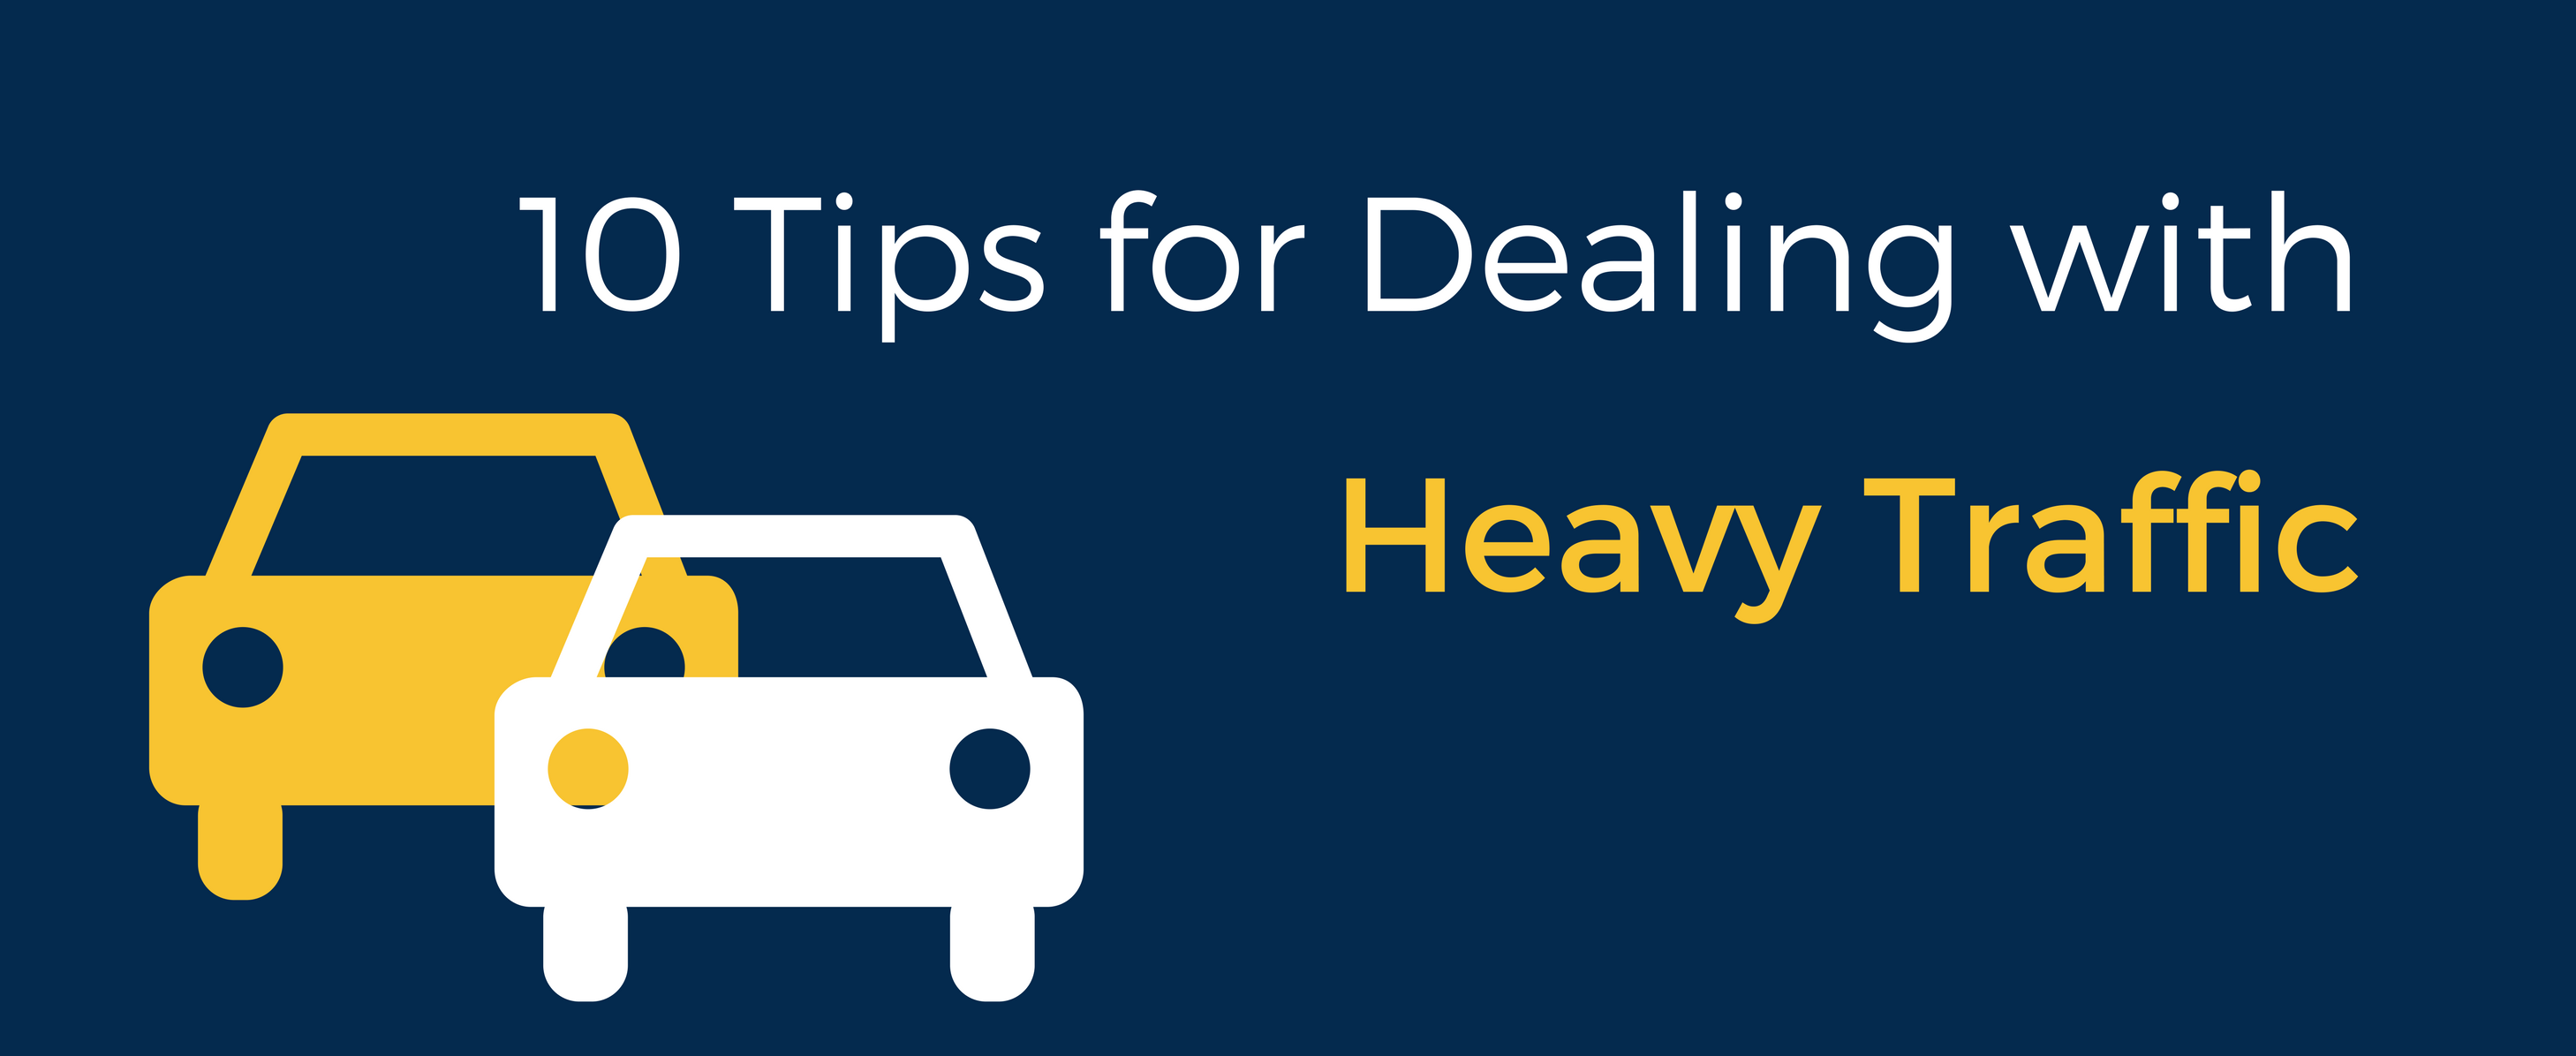 10 Tips for dealing with heavy traffic